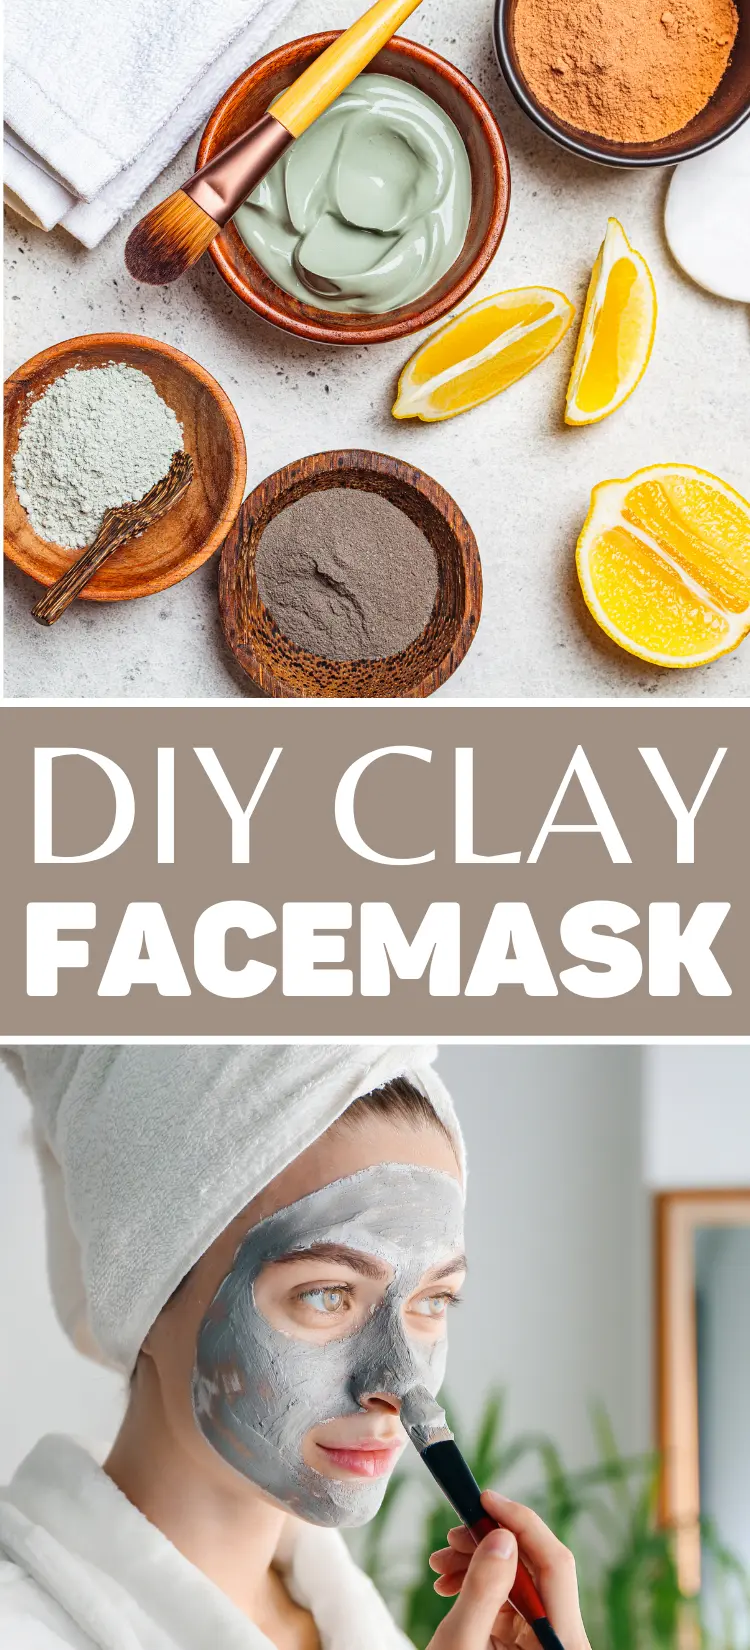 photo of woman applying a diy clay facemask